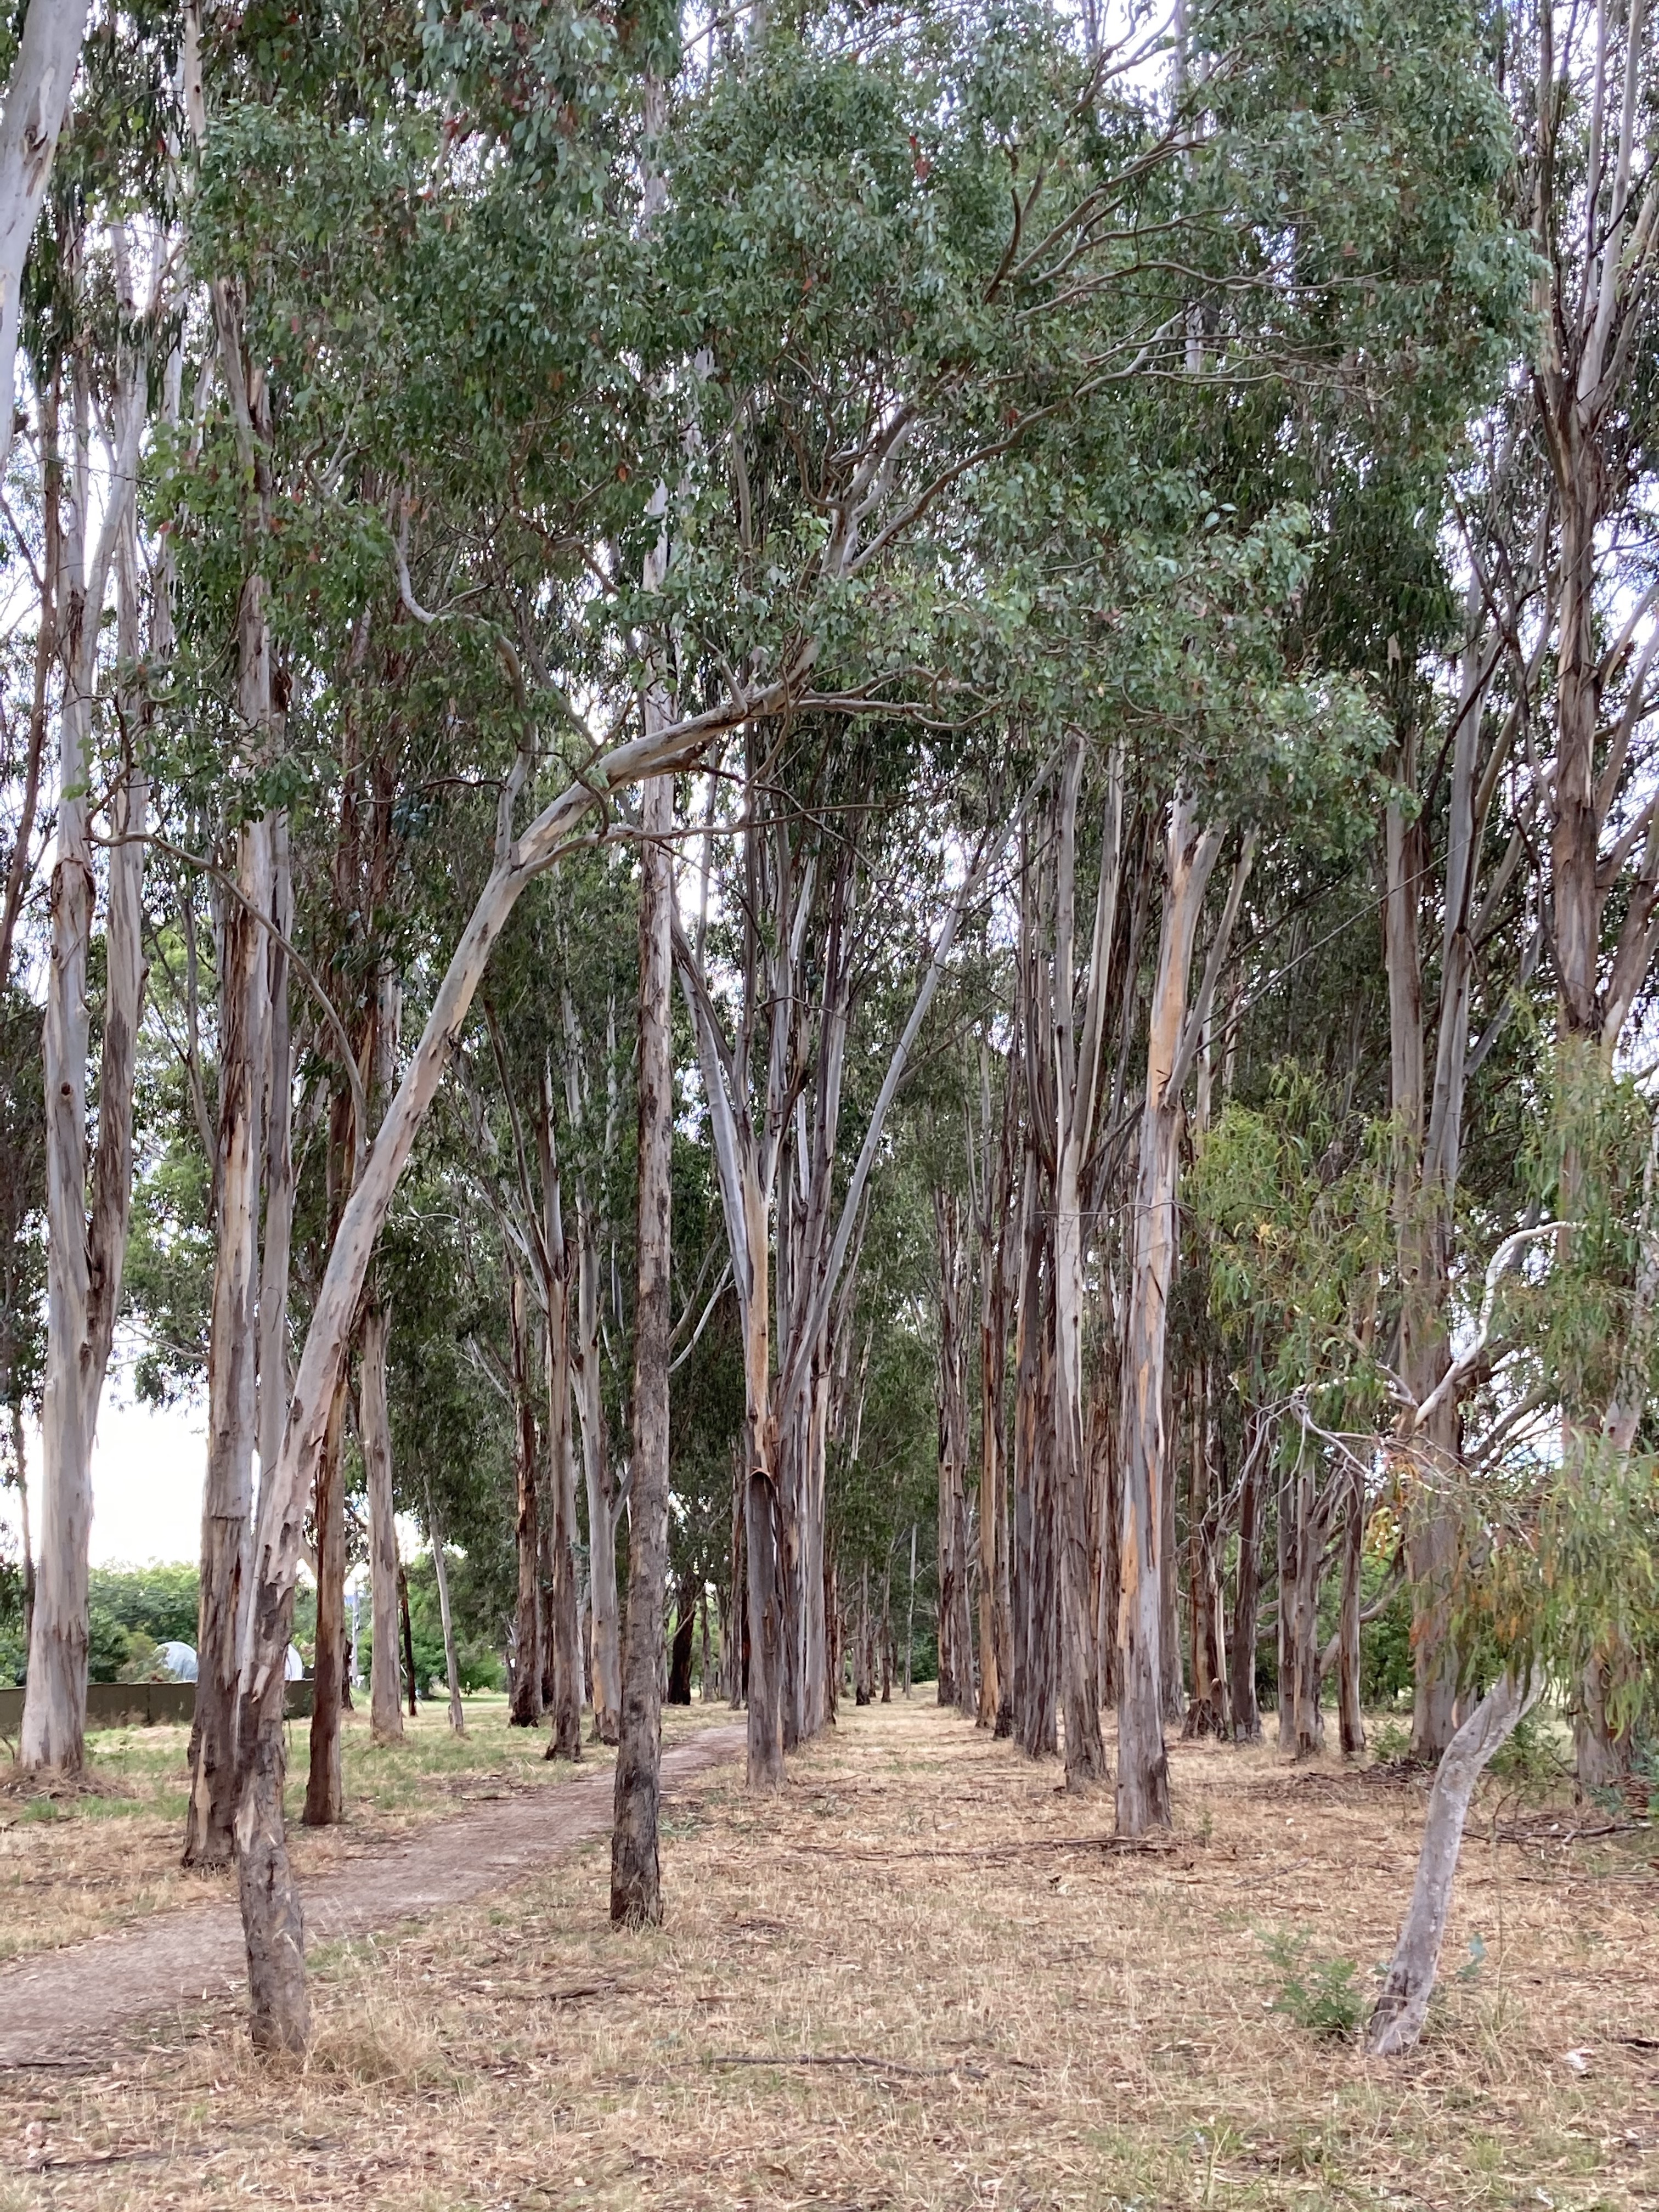 A stand of tall trees, in rows, with a path heading into the distance